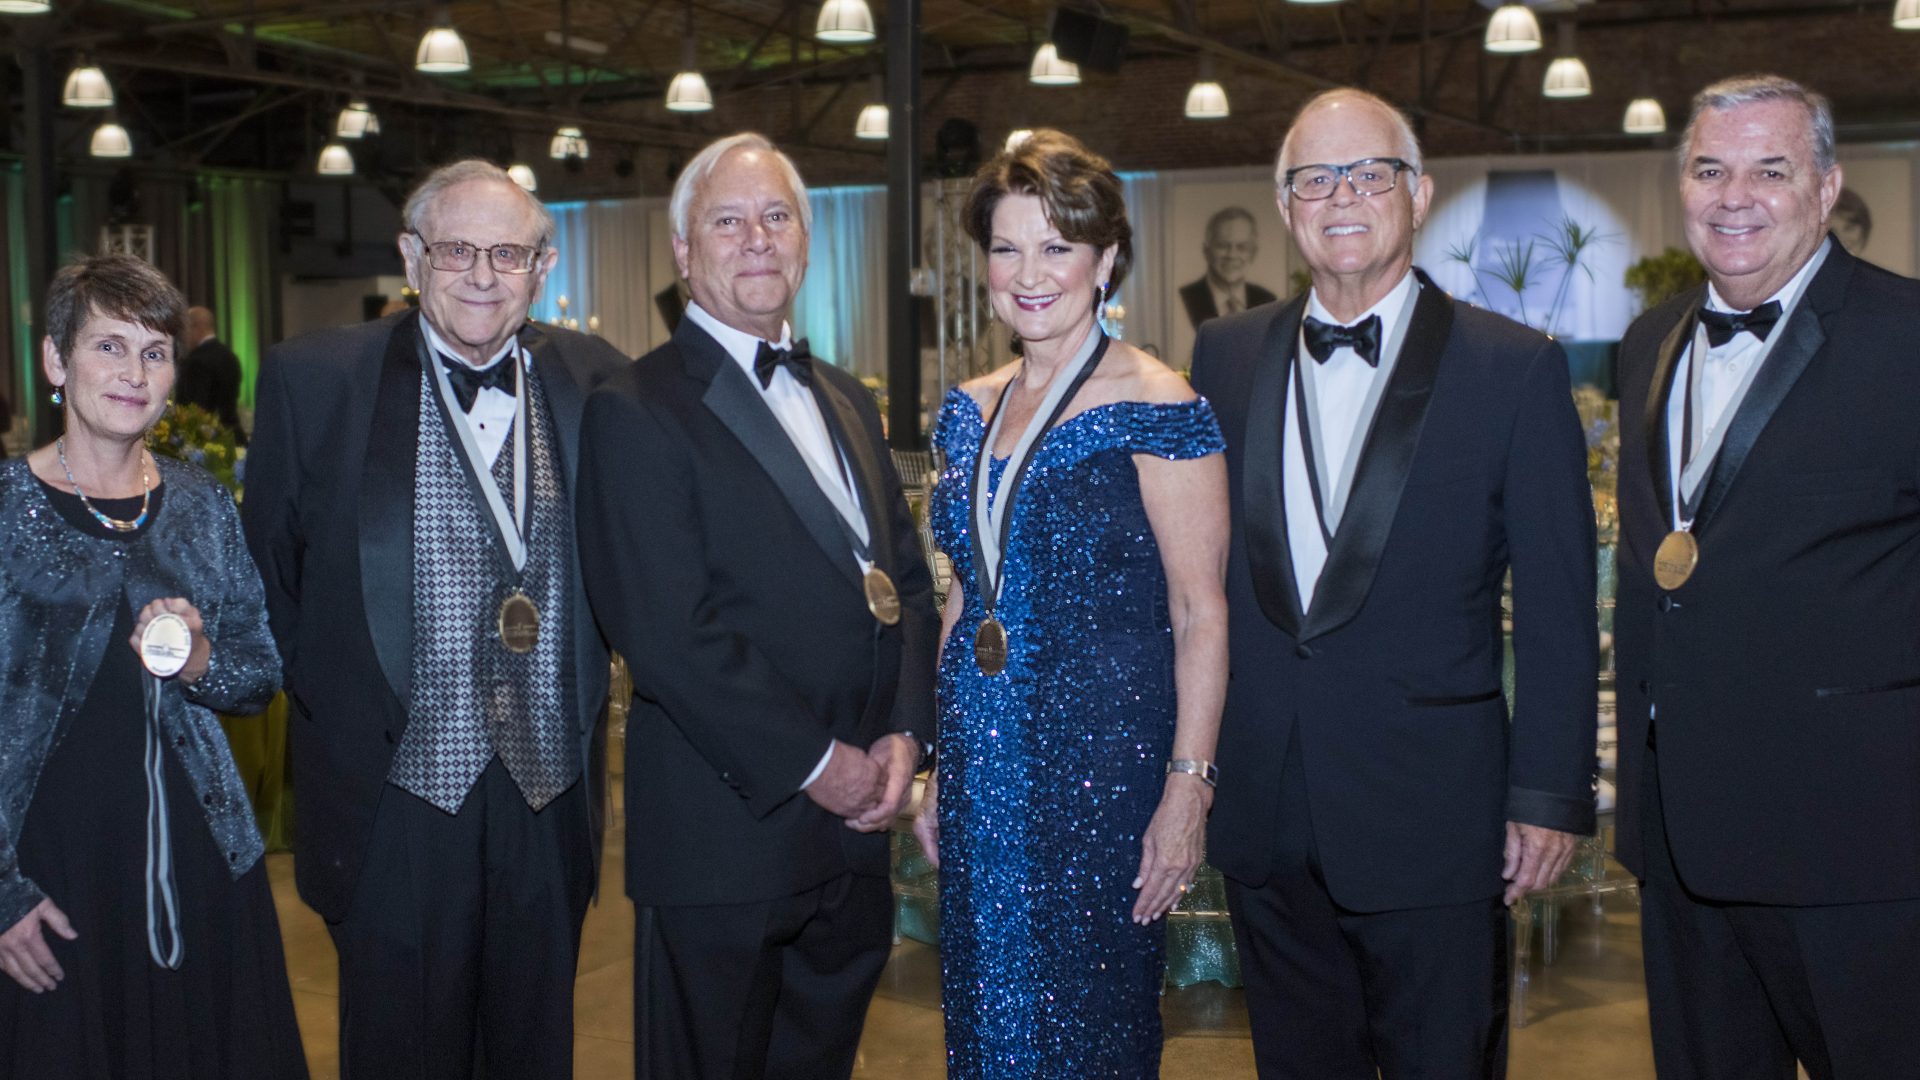 2019 Inductees of the Alabama Business Hall of Fame from L-R: Sue Whitehead daughter of Lonnie S. McMillian, Charles A. Collat, Sr., Gary P. Fayard, Marillyn A. Hewson, Joe W. Forehand, Jr., and Michael Reilly